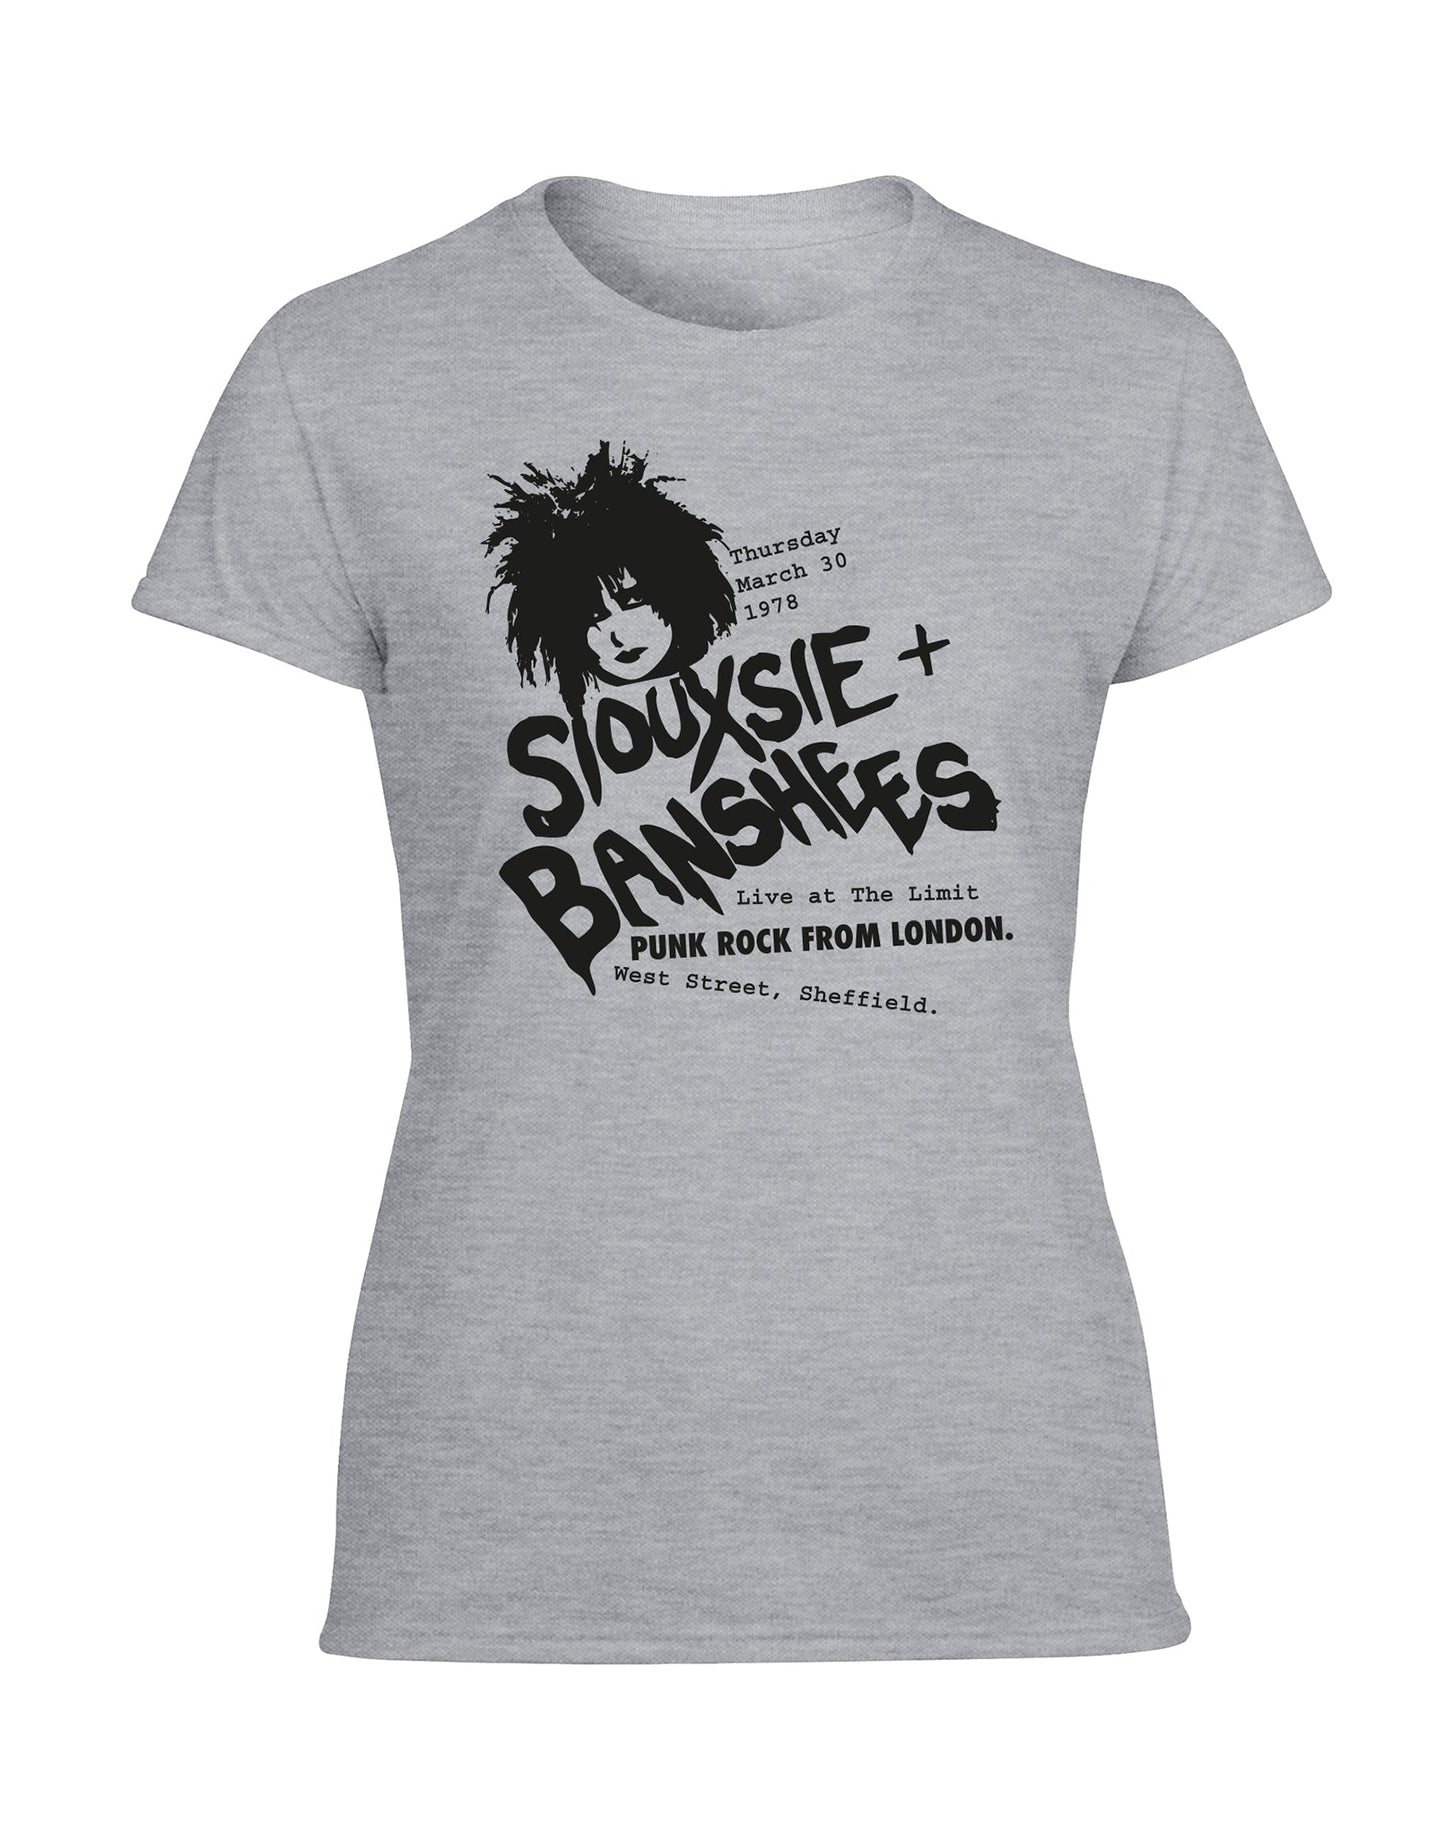 Siouxsie at the Limit ladies fit t-shirt- various colours - Dirty Stop Outs